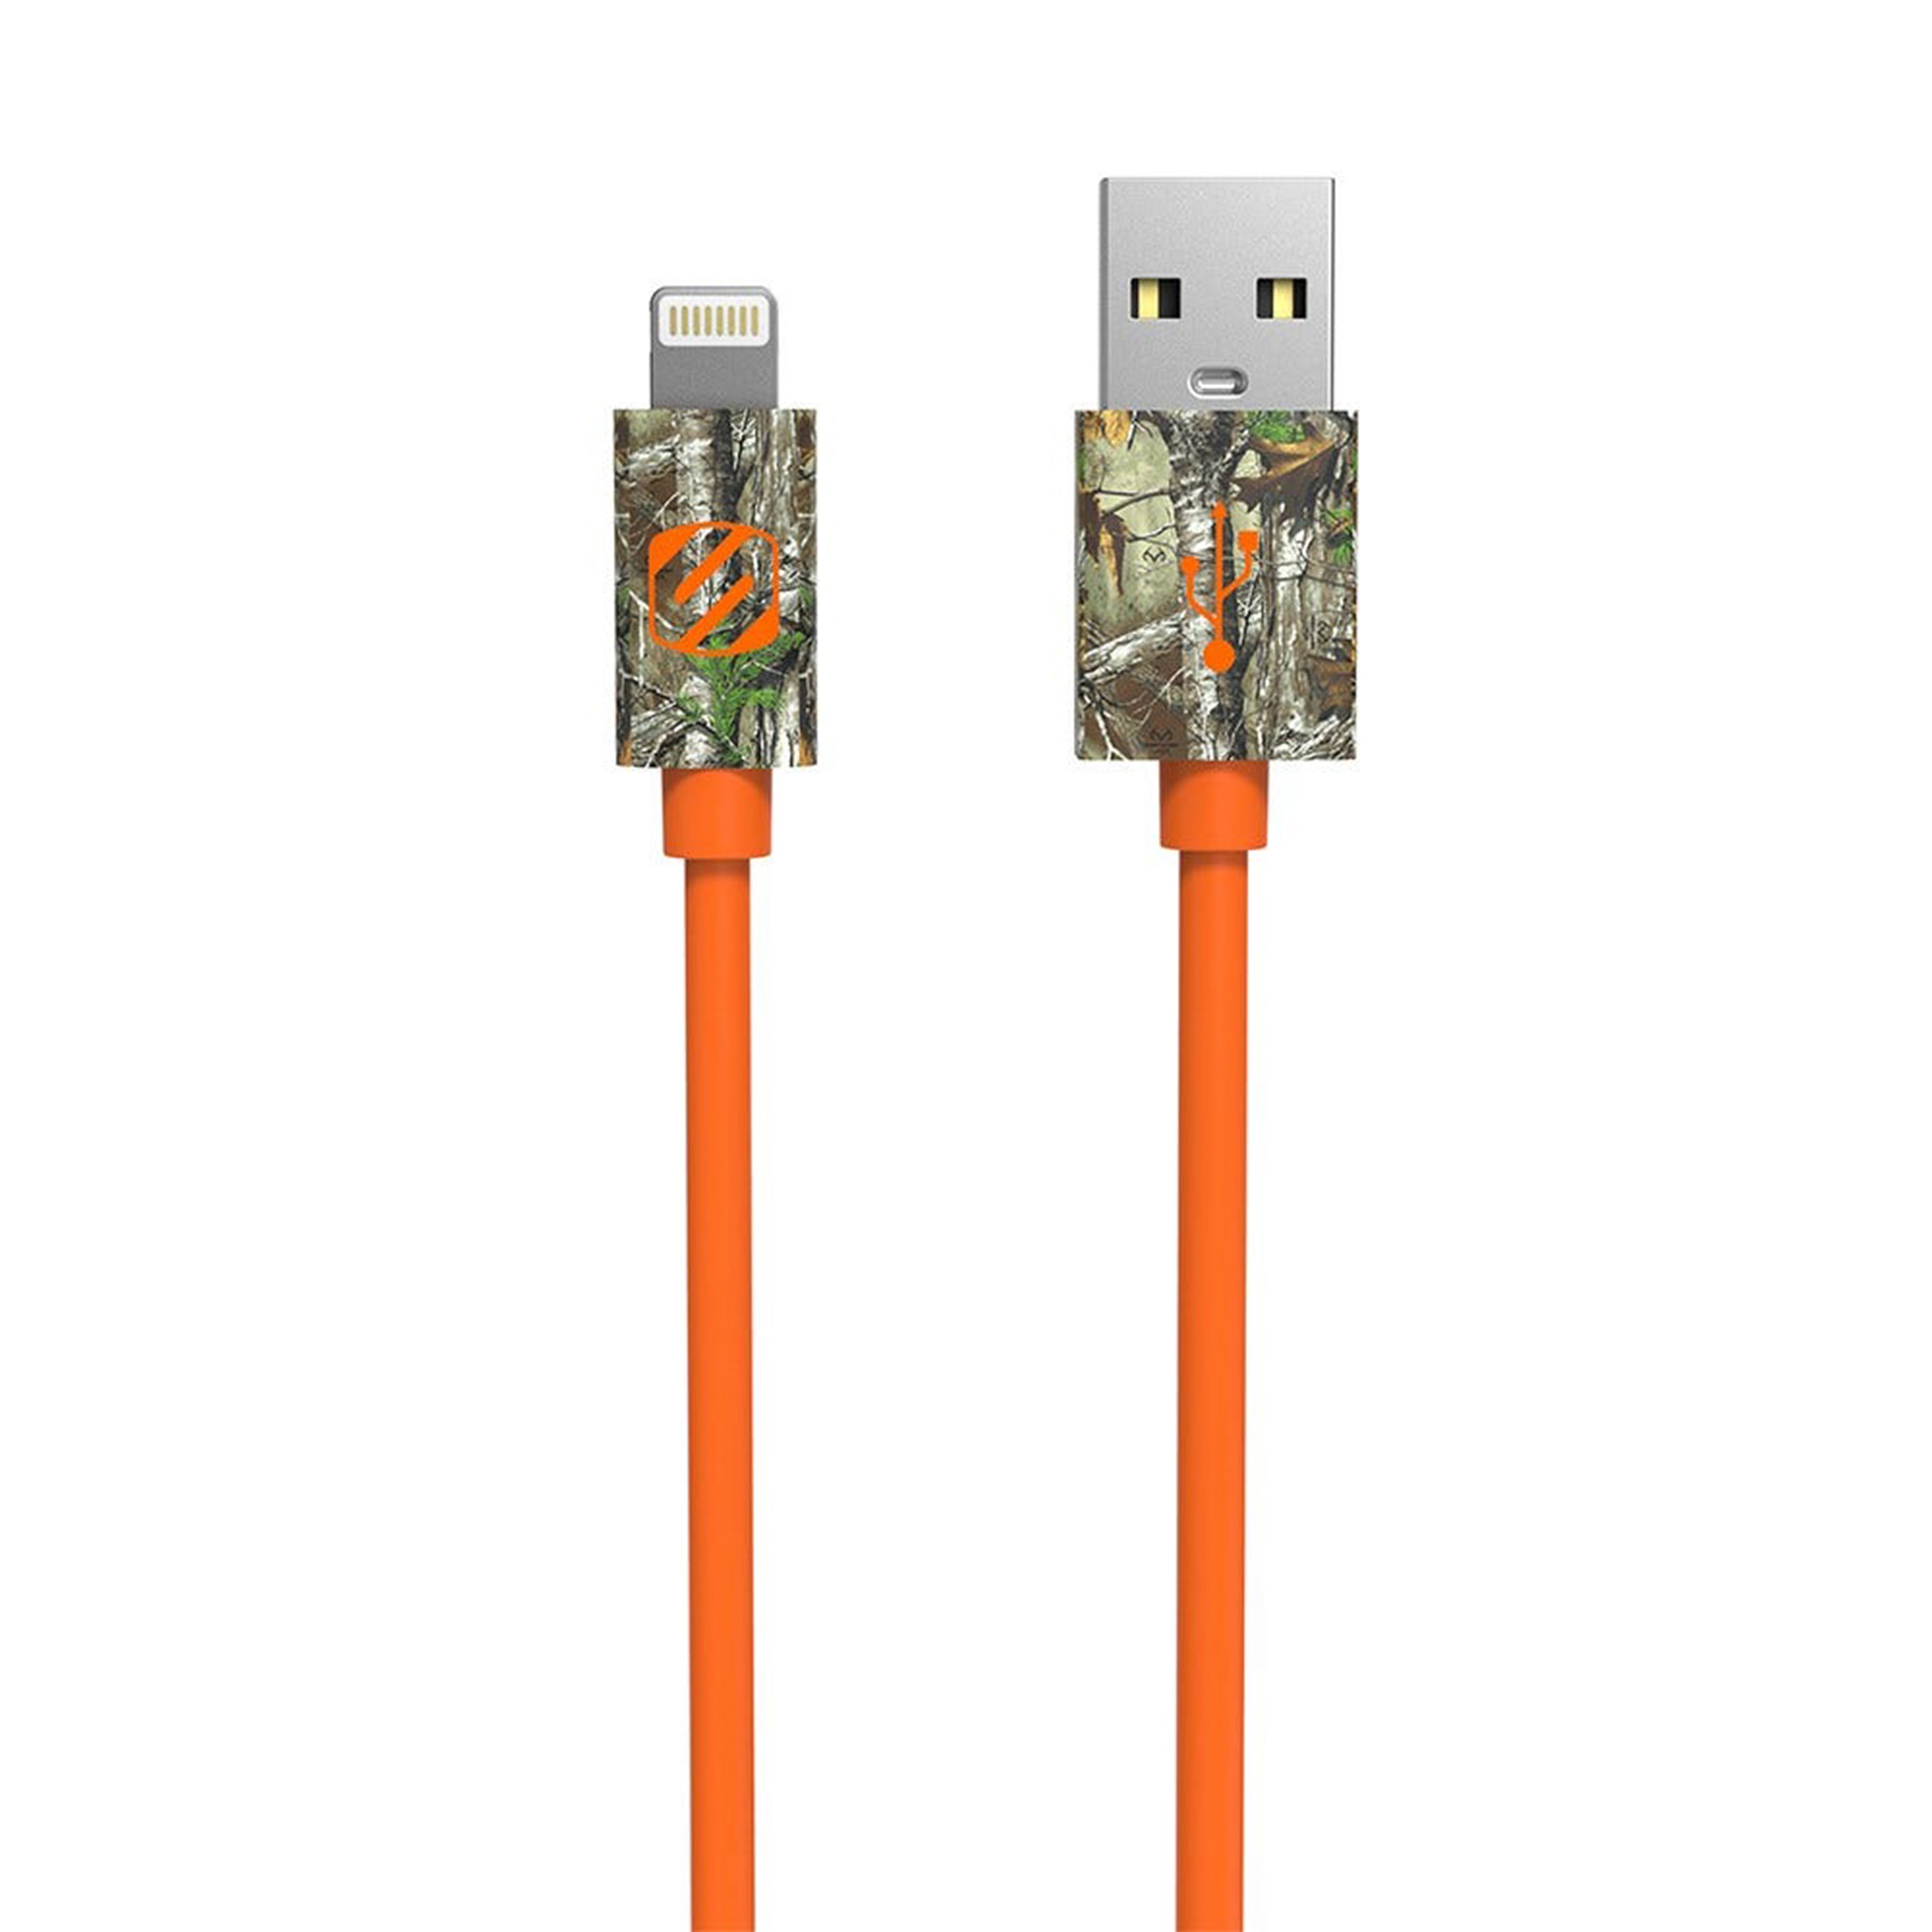 Scosche I3RT6, Charge & Sync Cable For Lightning USB Devices - 6FT Cable Lenth (Orange/Realtree)